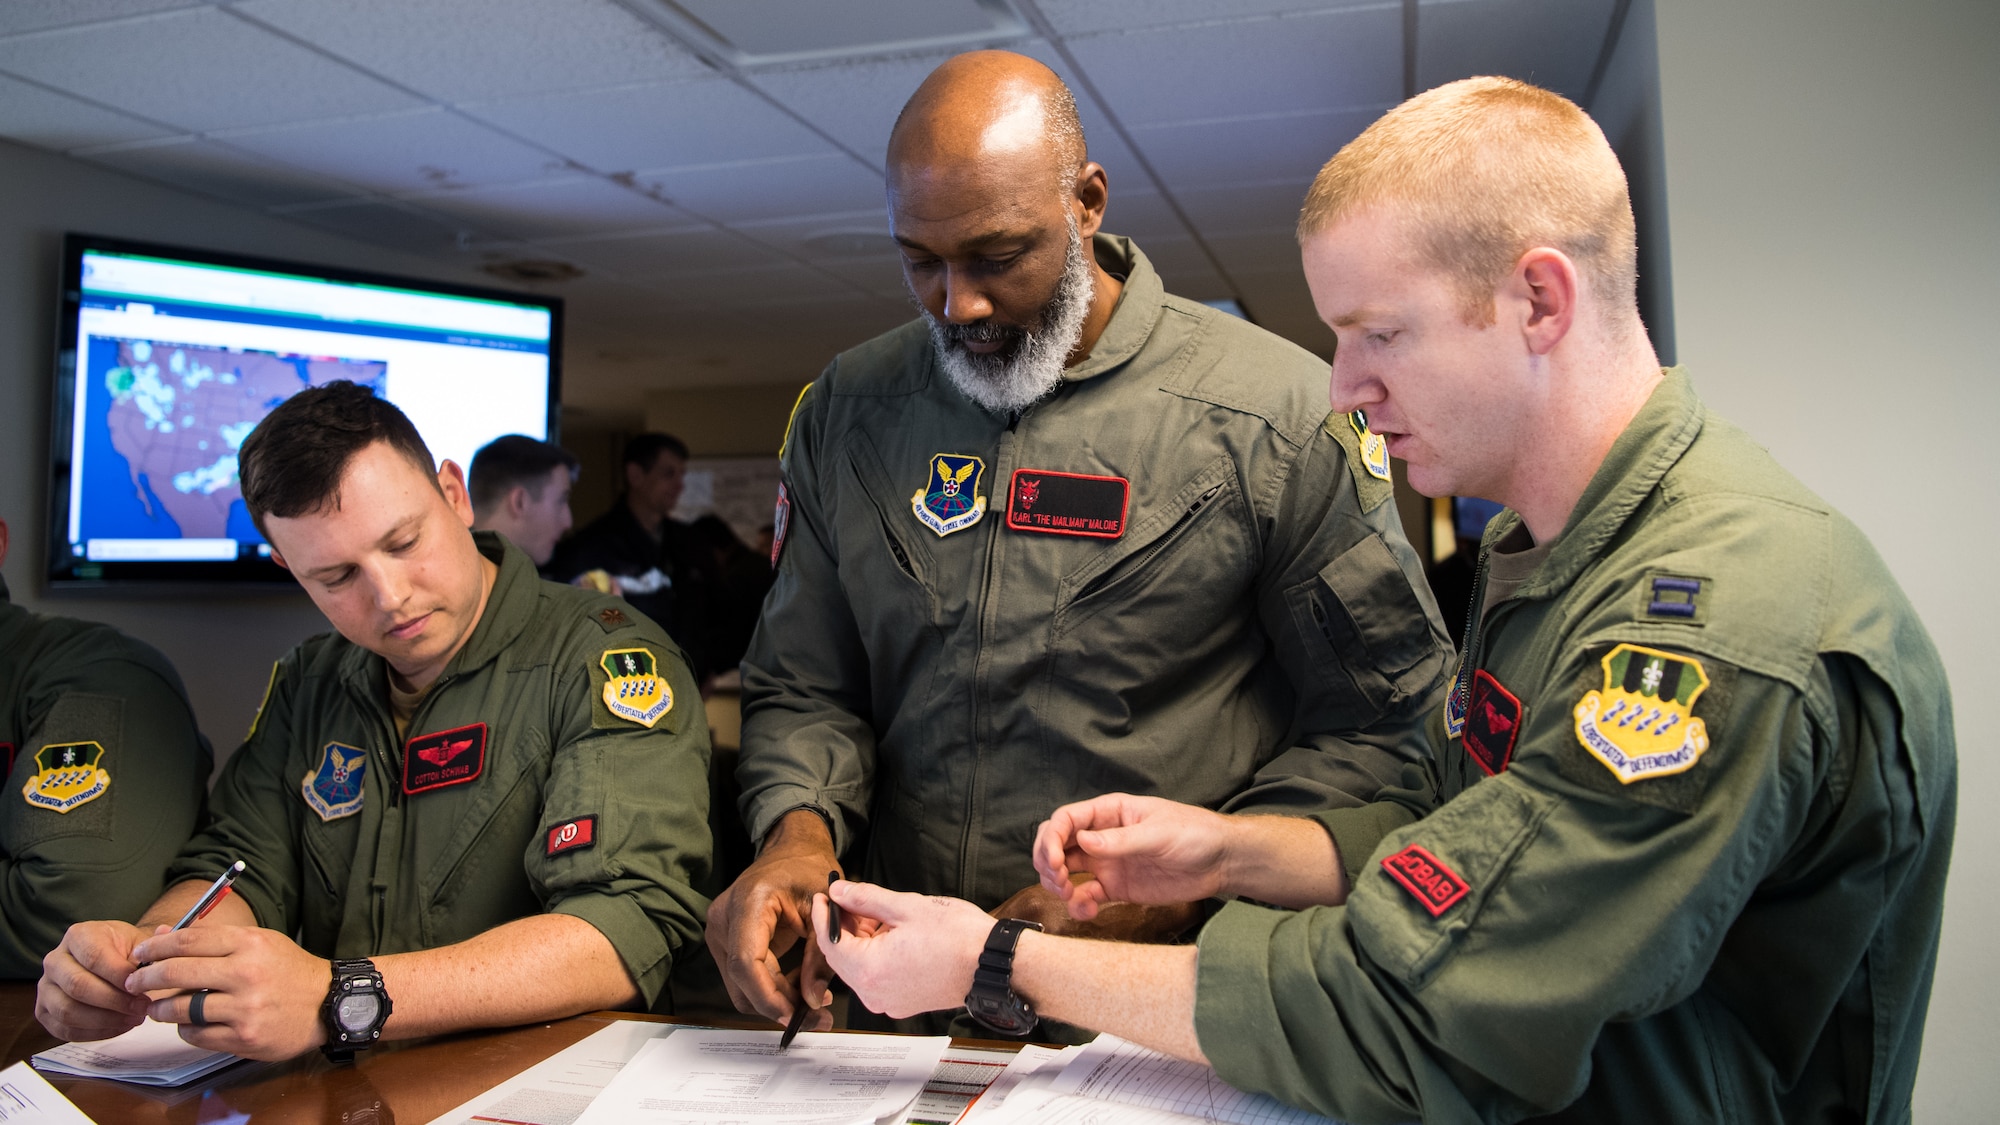 Karl Malone (center), NBA Hall of Famer, recieves a pre-flight brief prior to his flight with the 96th Bomb Squadron at Barksdale Air Force Base, La., Feb. 5, 2020. Malone spent time with Airmen, toured facilities and even took a ride in a B-52H Stratofortress. (U.S. Air Force photo by Airman 1st Class Jacob B. Wrightsman)